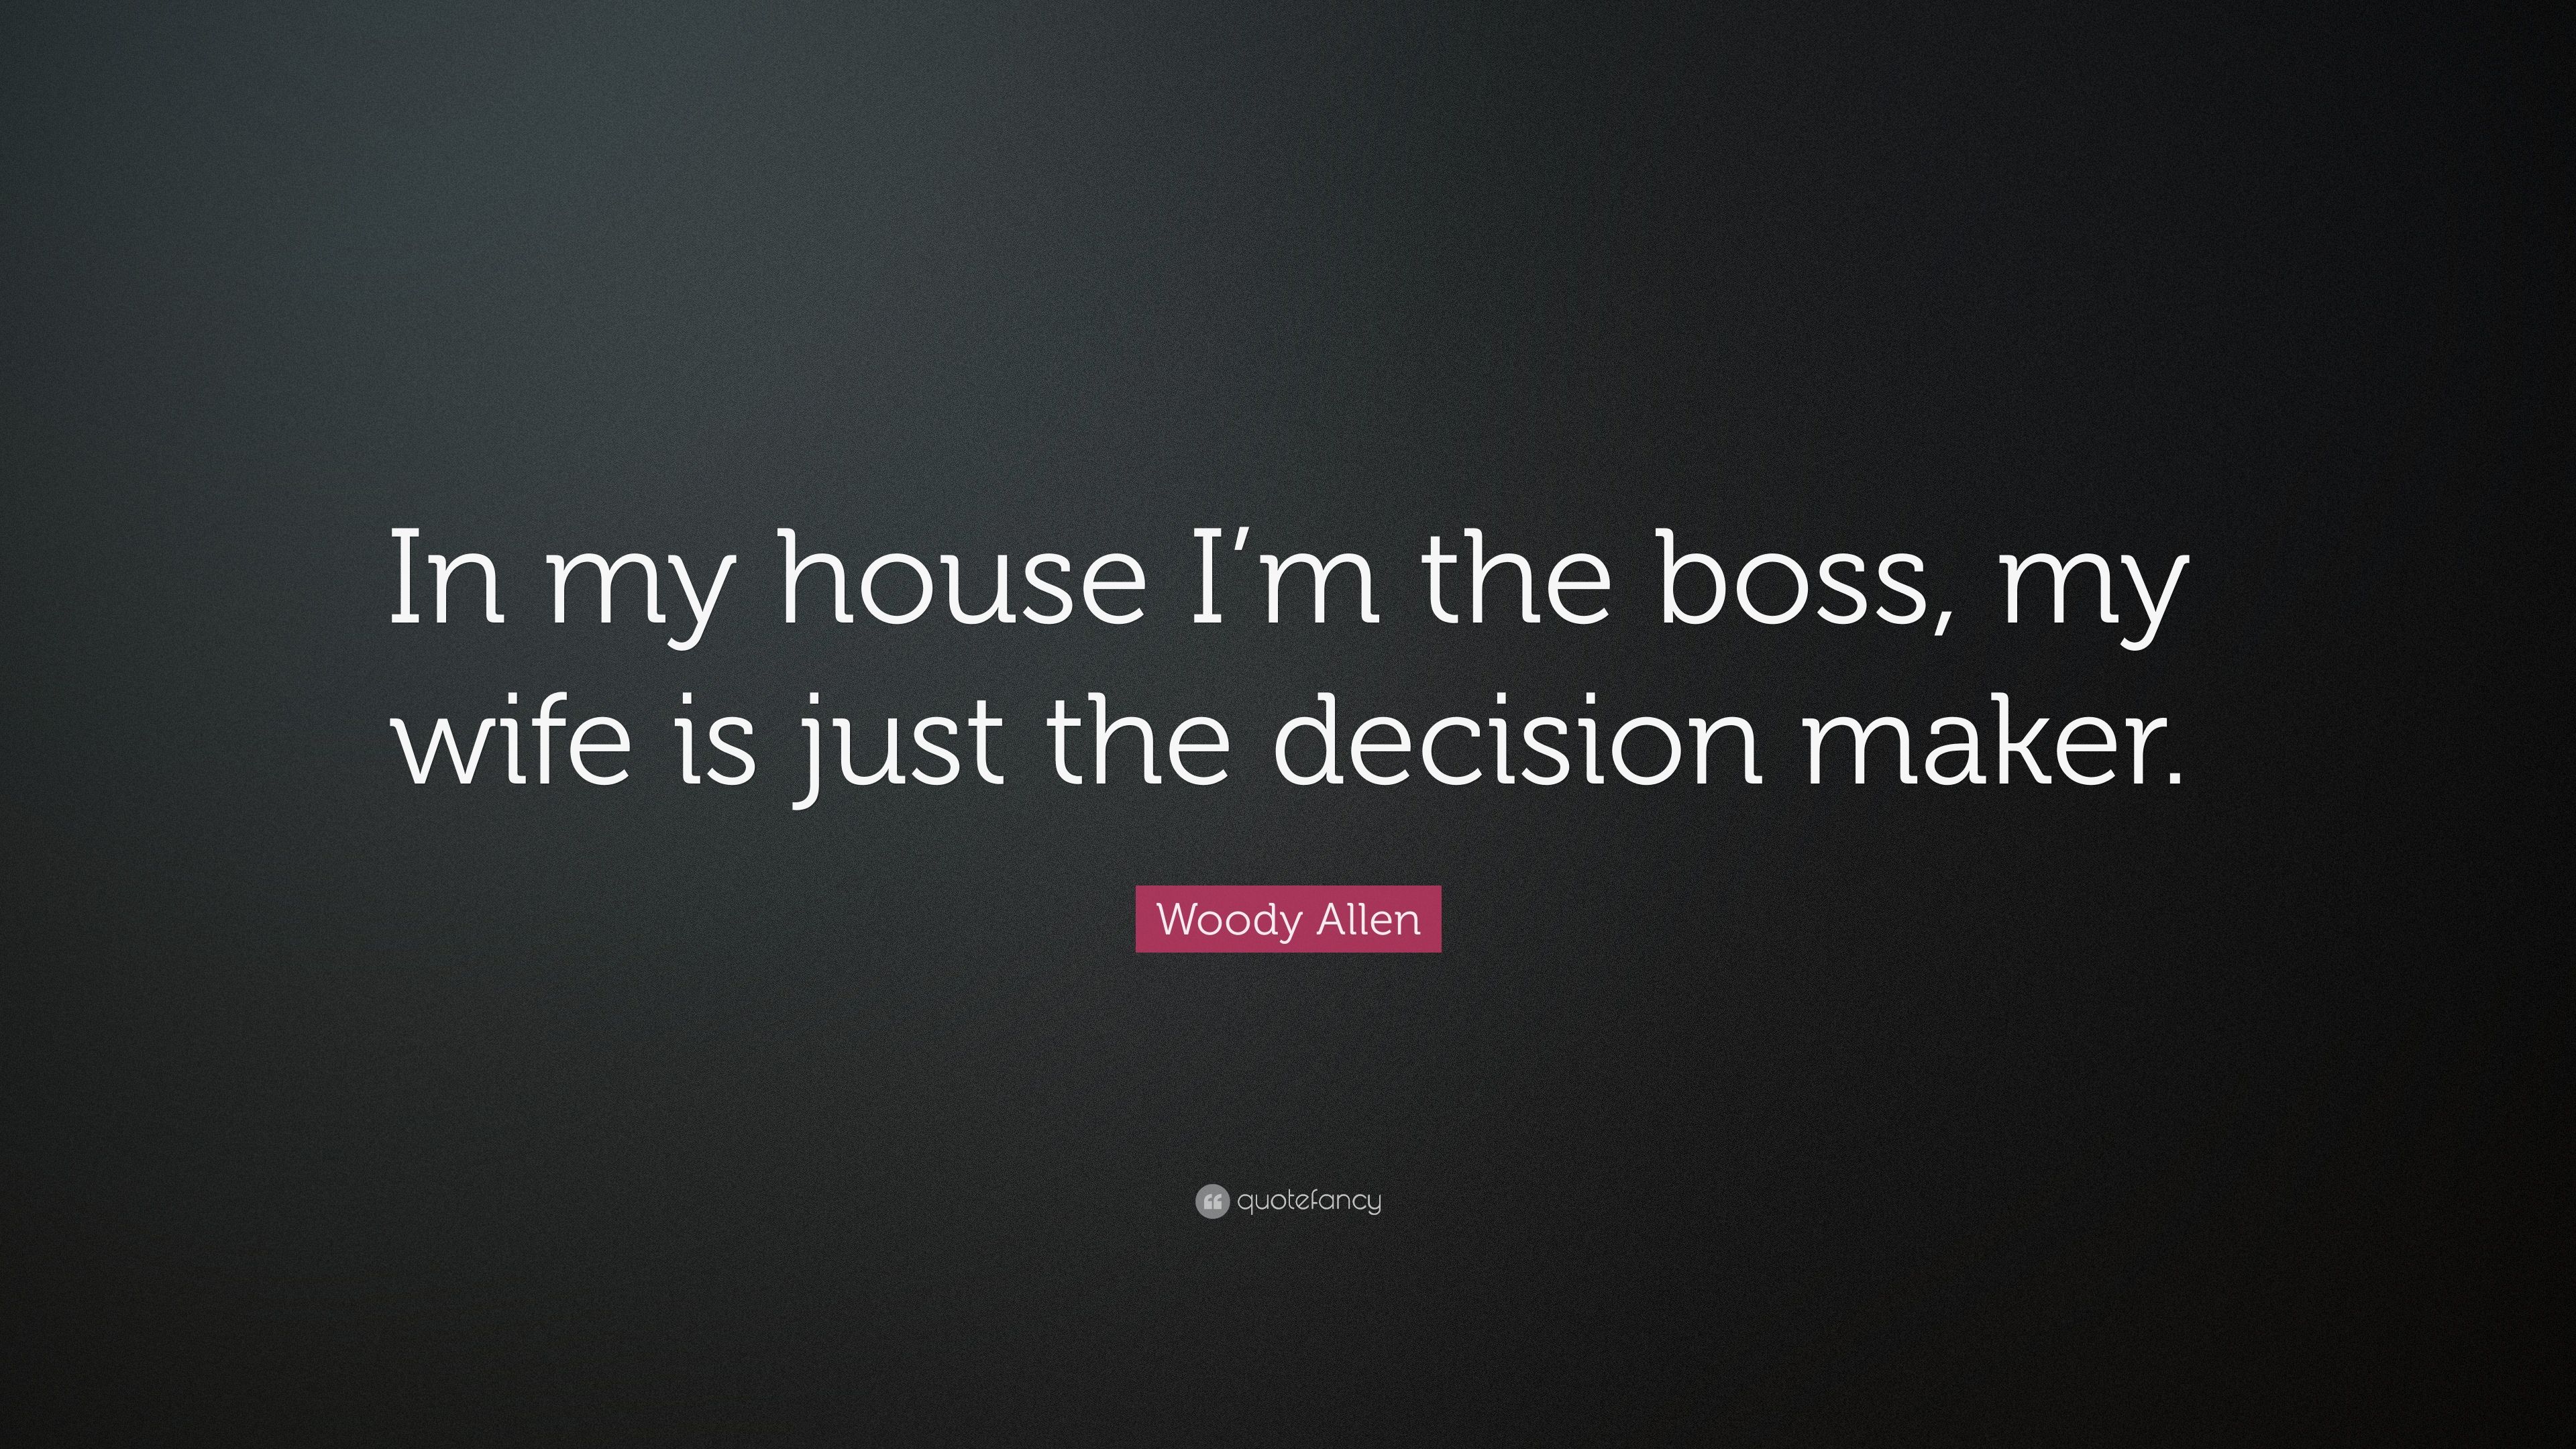 Woody Allen Quote: “In my house I'm the boss, my wife is just